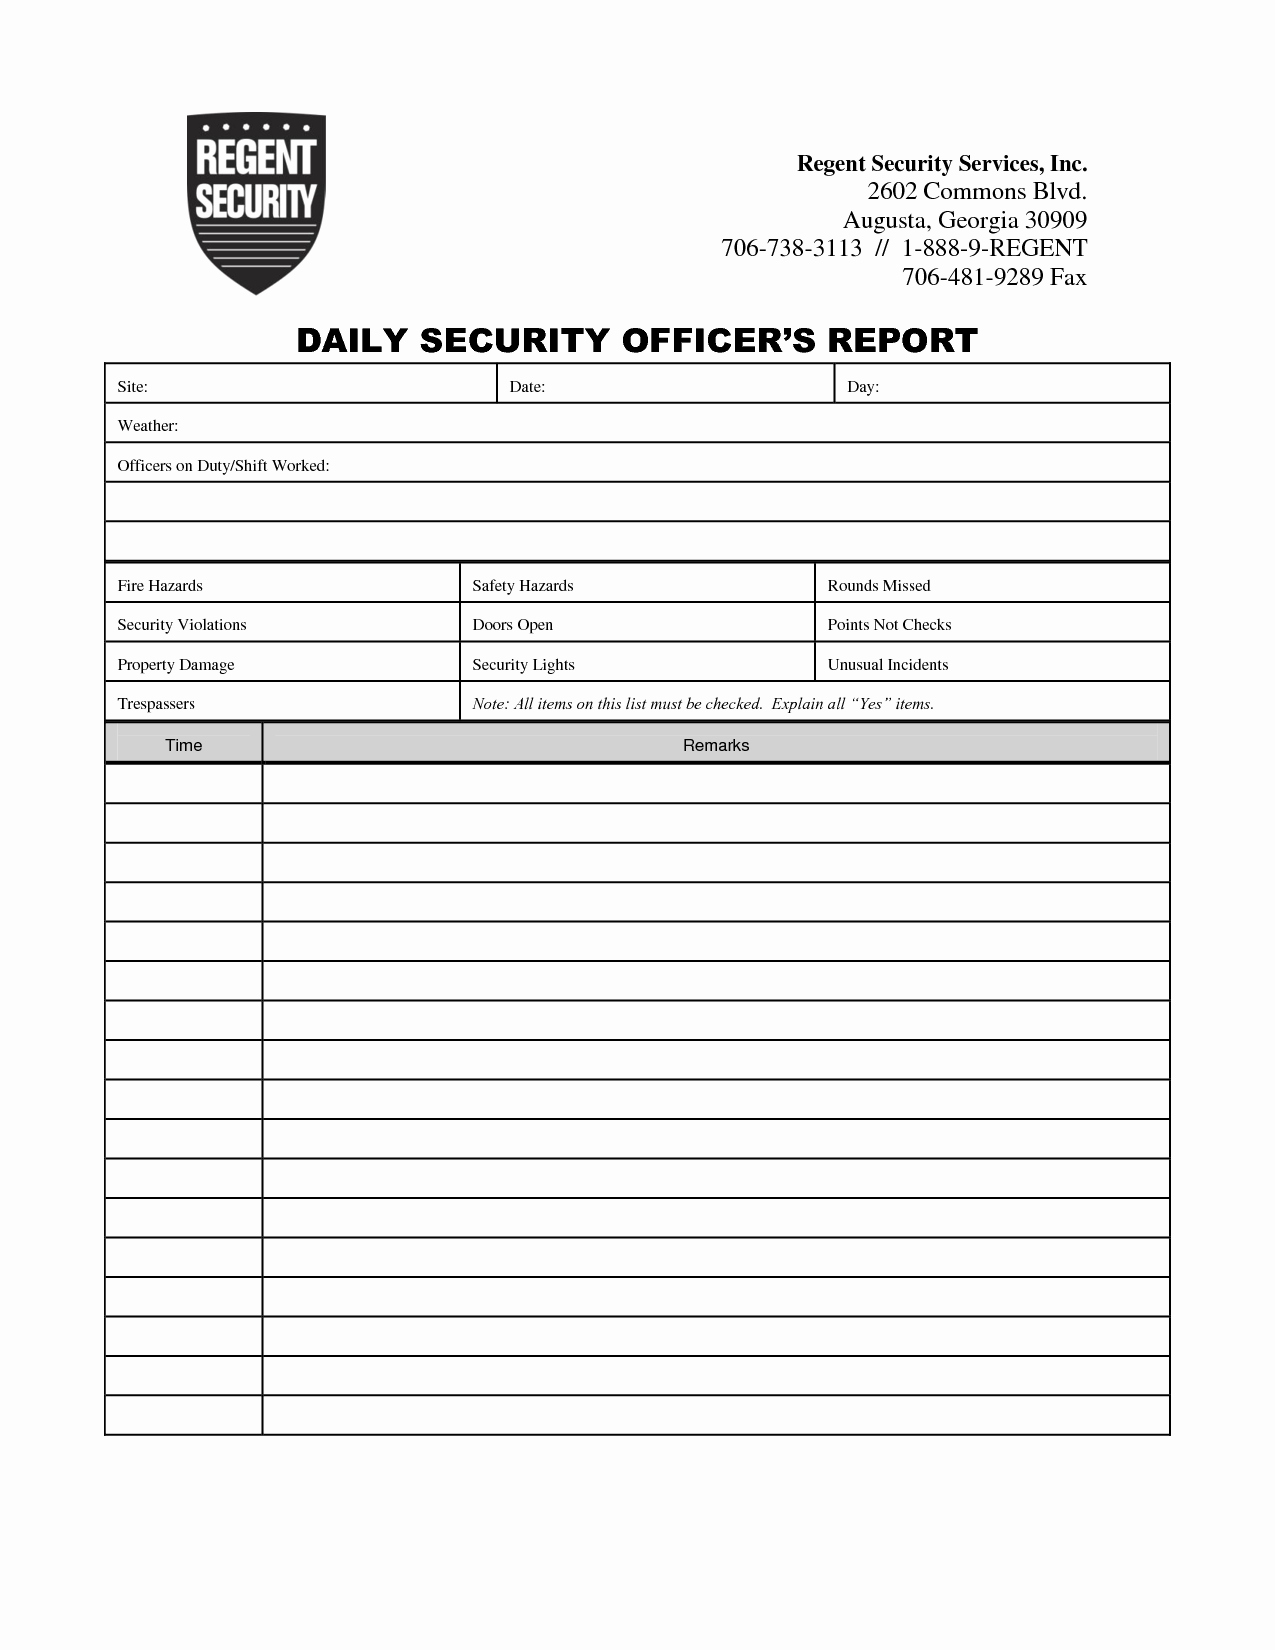 Daily Activity Report Template Fresh Security Guard Daily Activity Report Sample